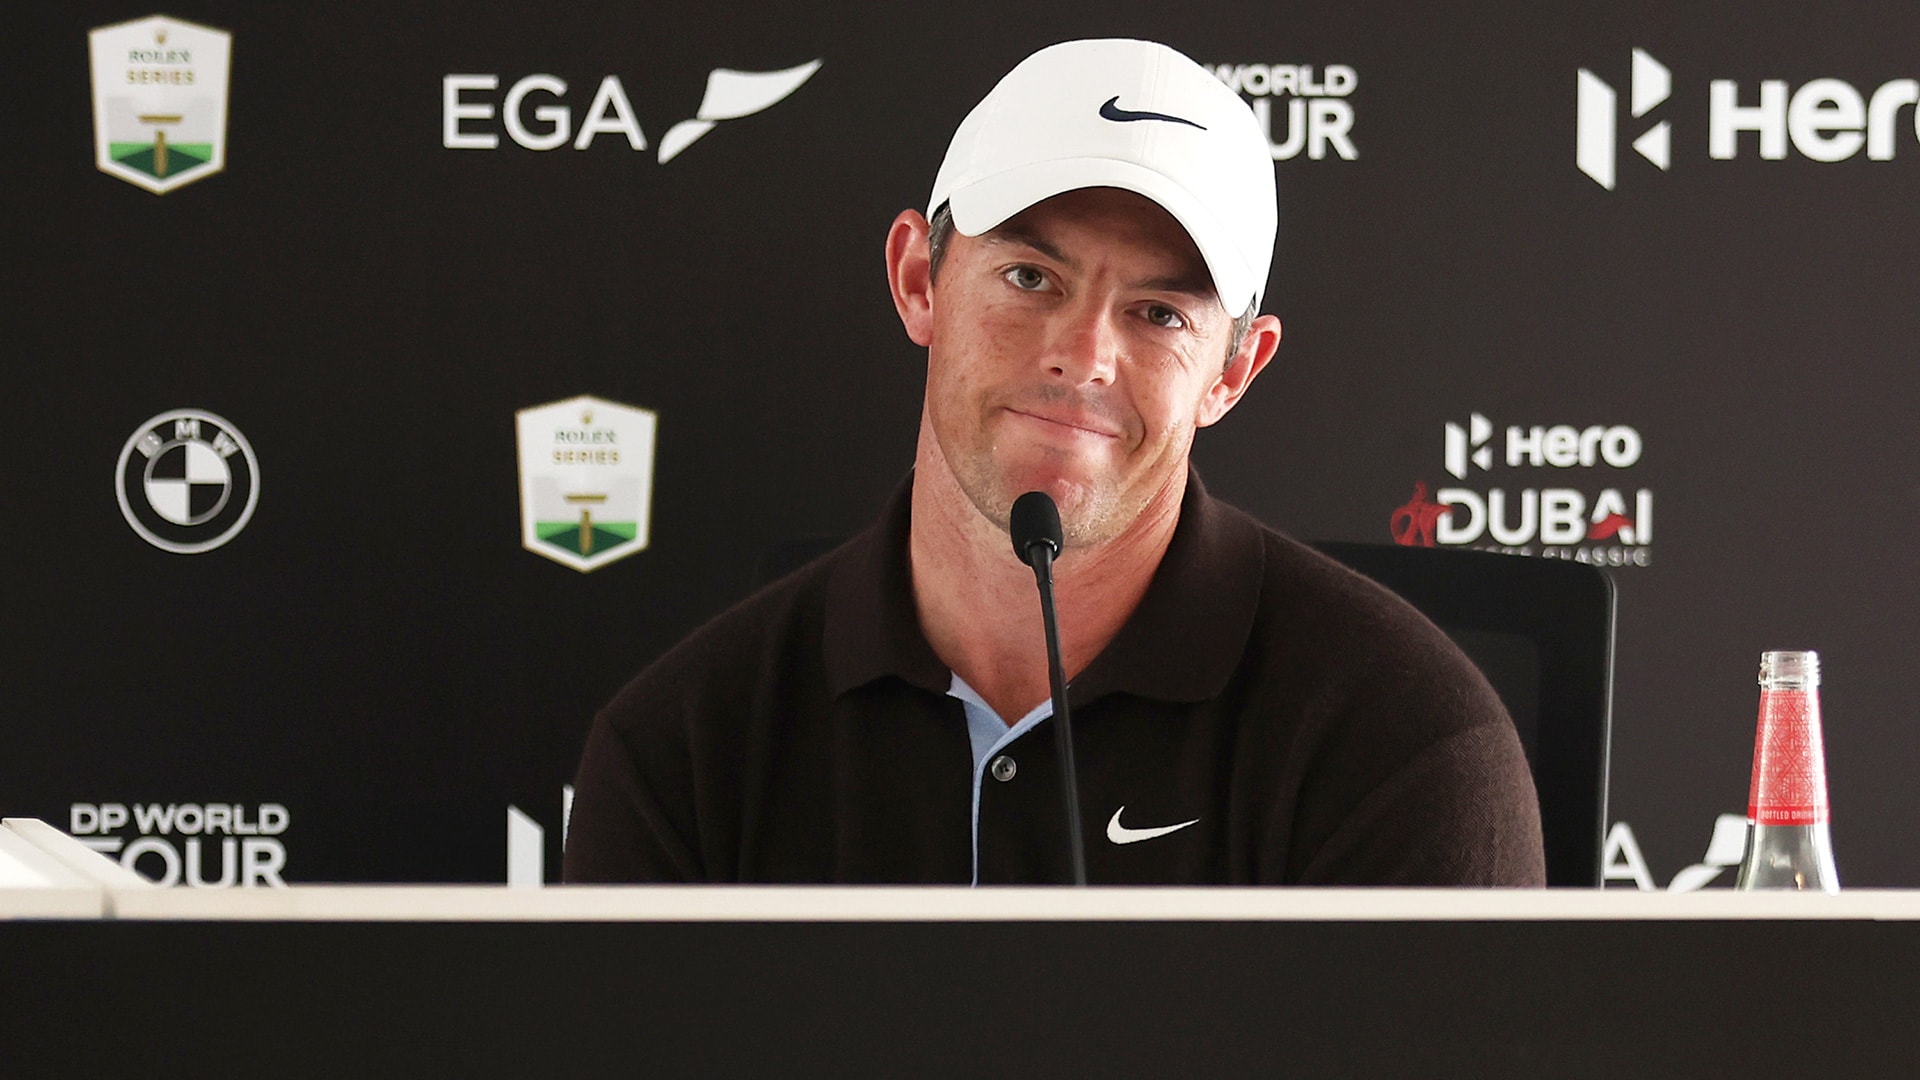 Rory McIlroy confirms snub as video shows tee toss; Patrick Reed fires back